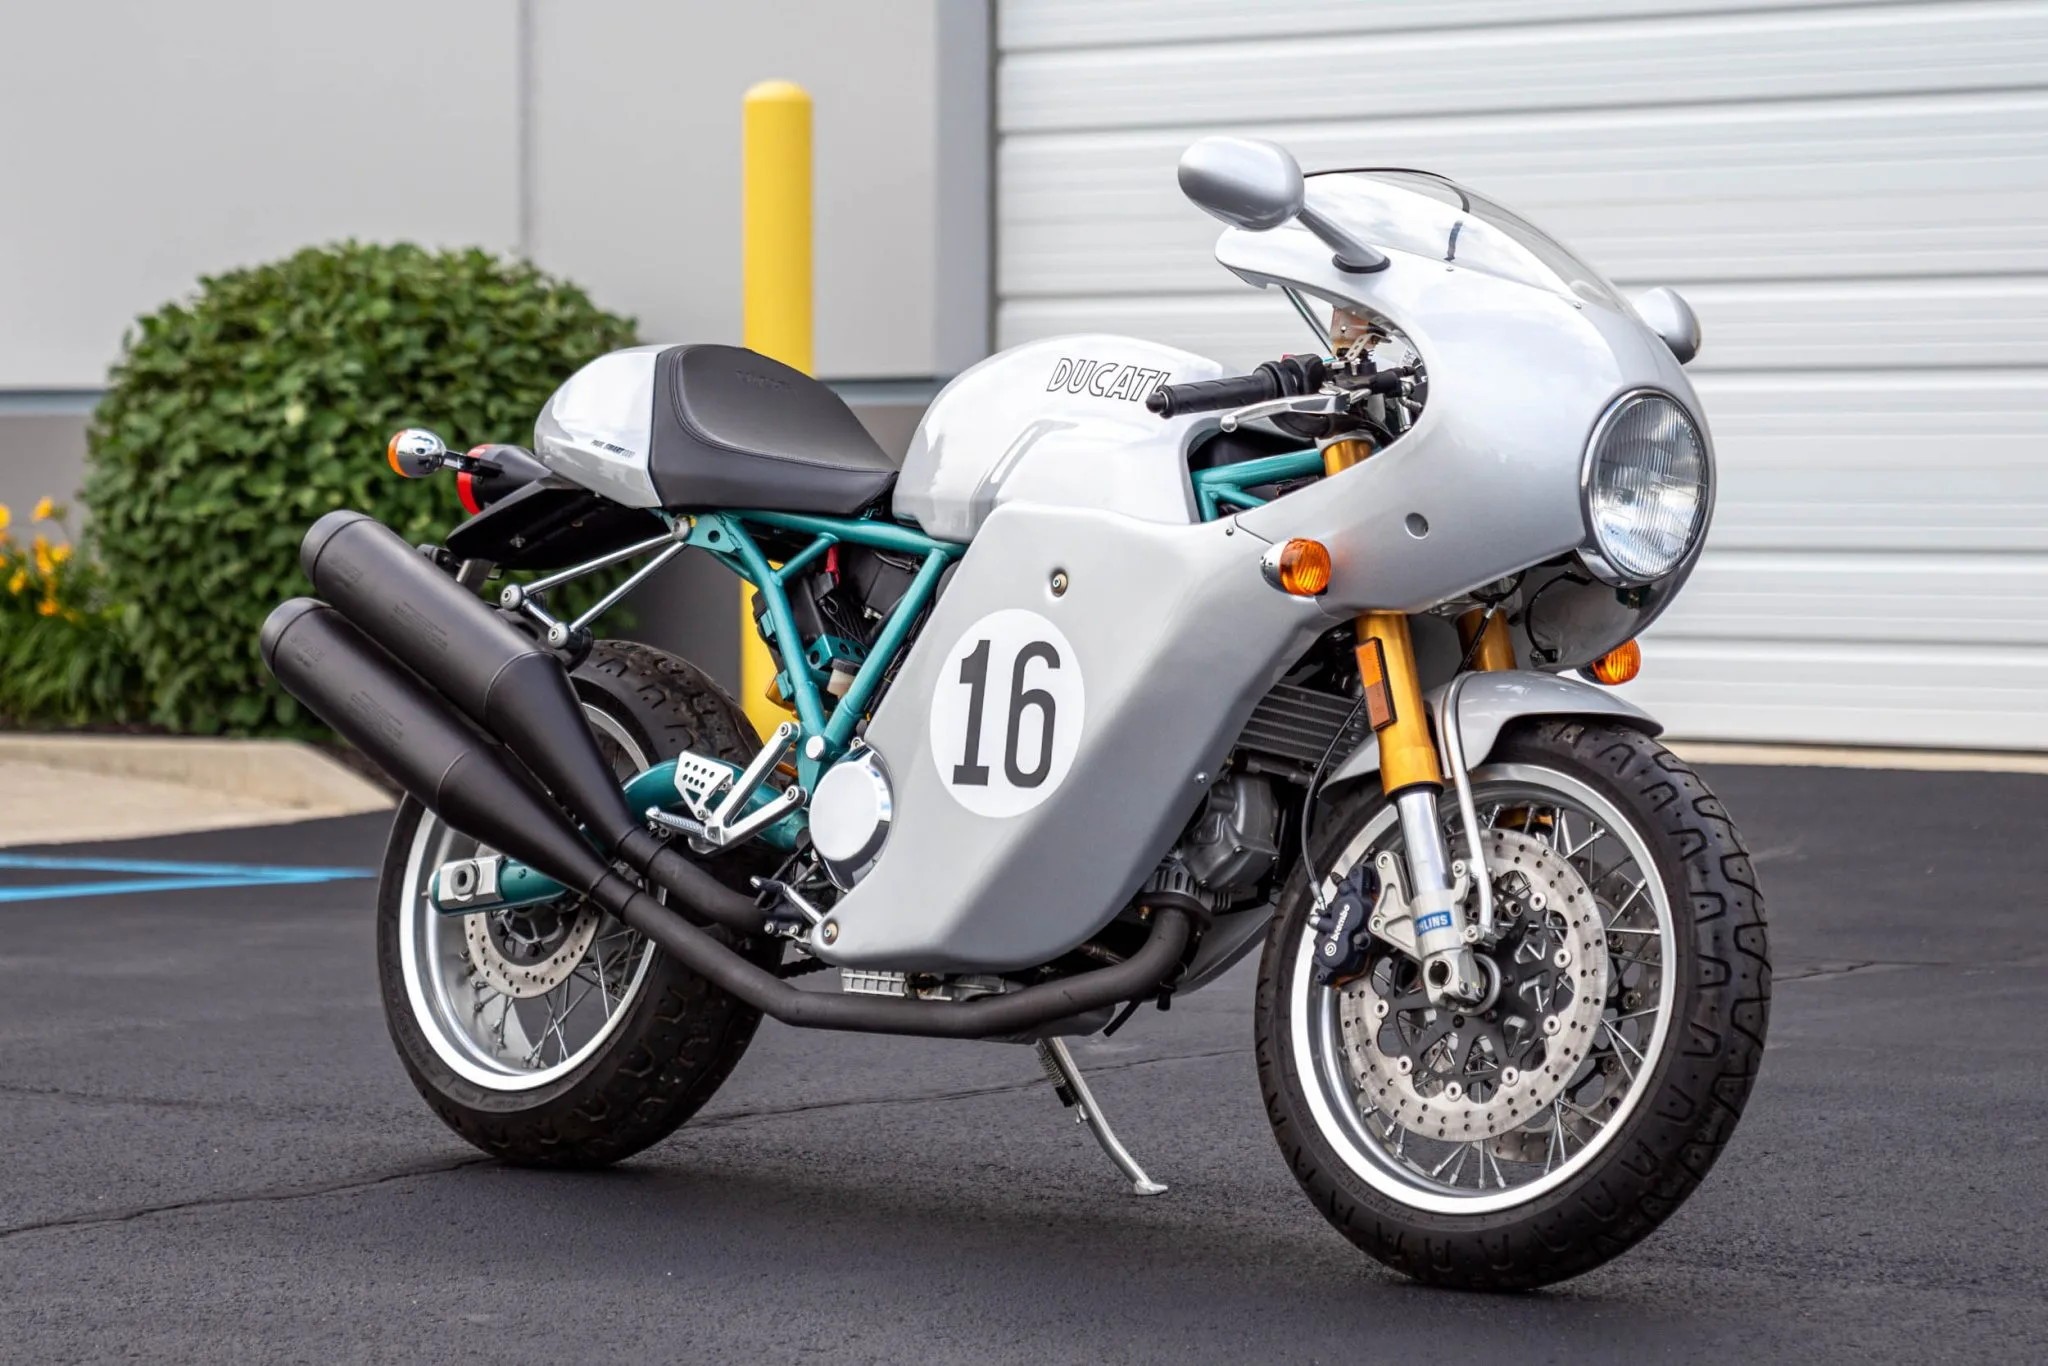 Picture-Perfect Ducati Paul Smart 1000 LE Has Fewer Miles Than 